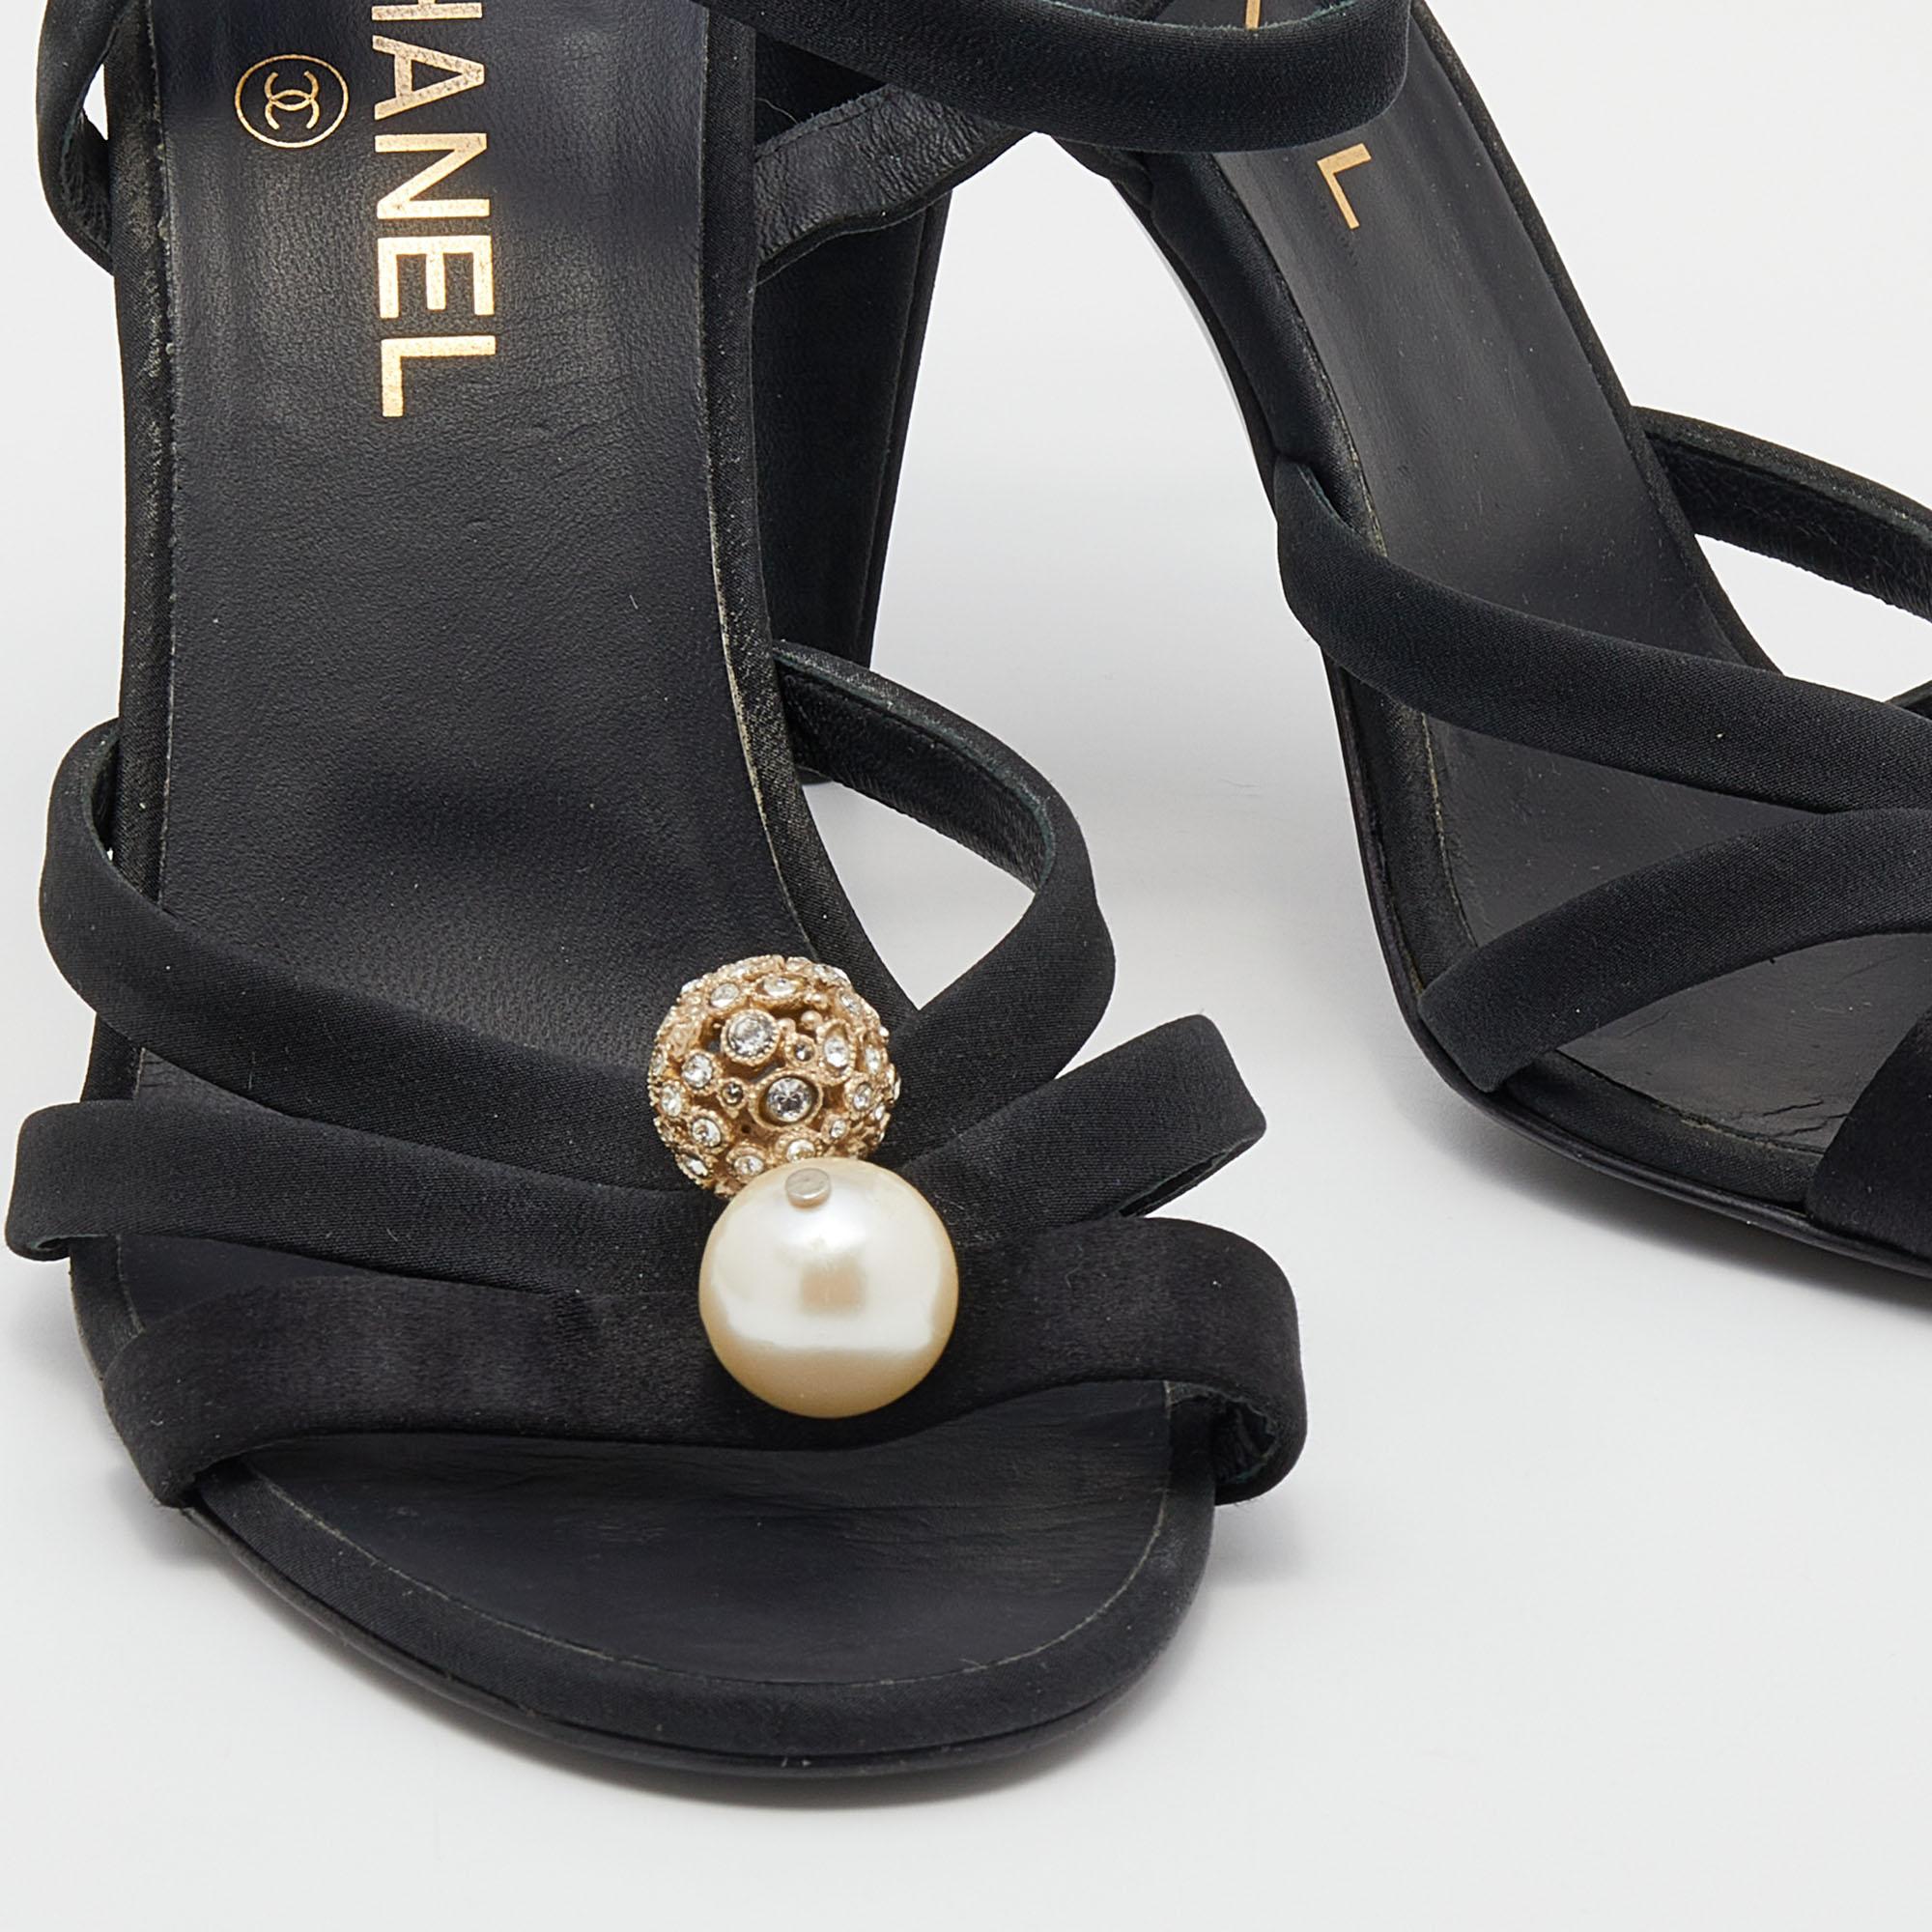 Chanel Black Satin And Fabric Embellished Strappy Sandals Size 39.5 In Good Condition In Dubai, Al Qouz 2